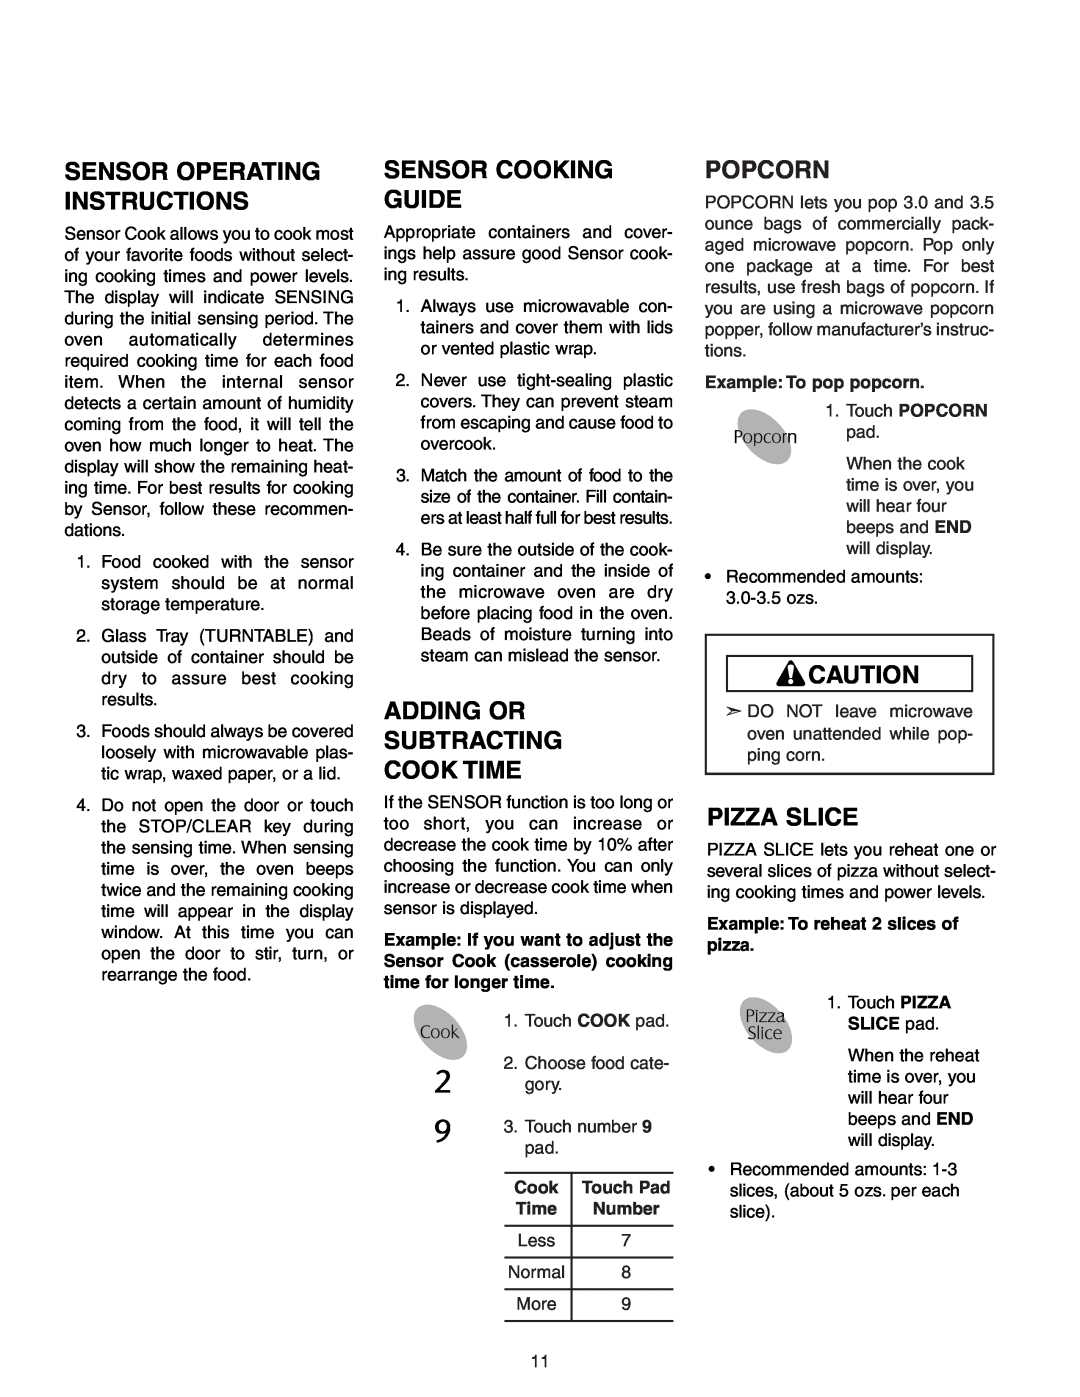 Maytag MMV51566AA/MMV5156AC owner manual Sensor Cooking Guide, Adding Or Subtracting Cook Time, Popcorn, Pizza Slice 